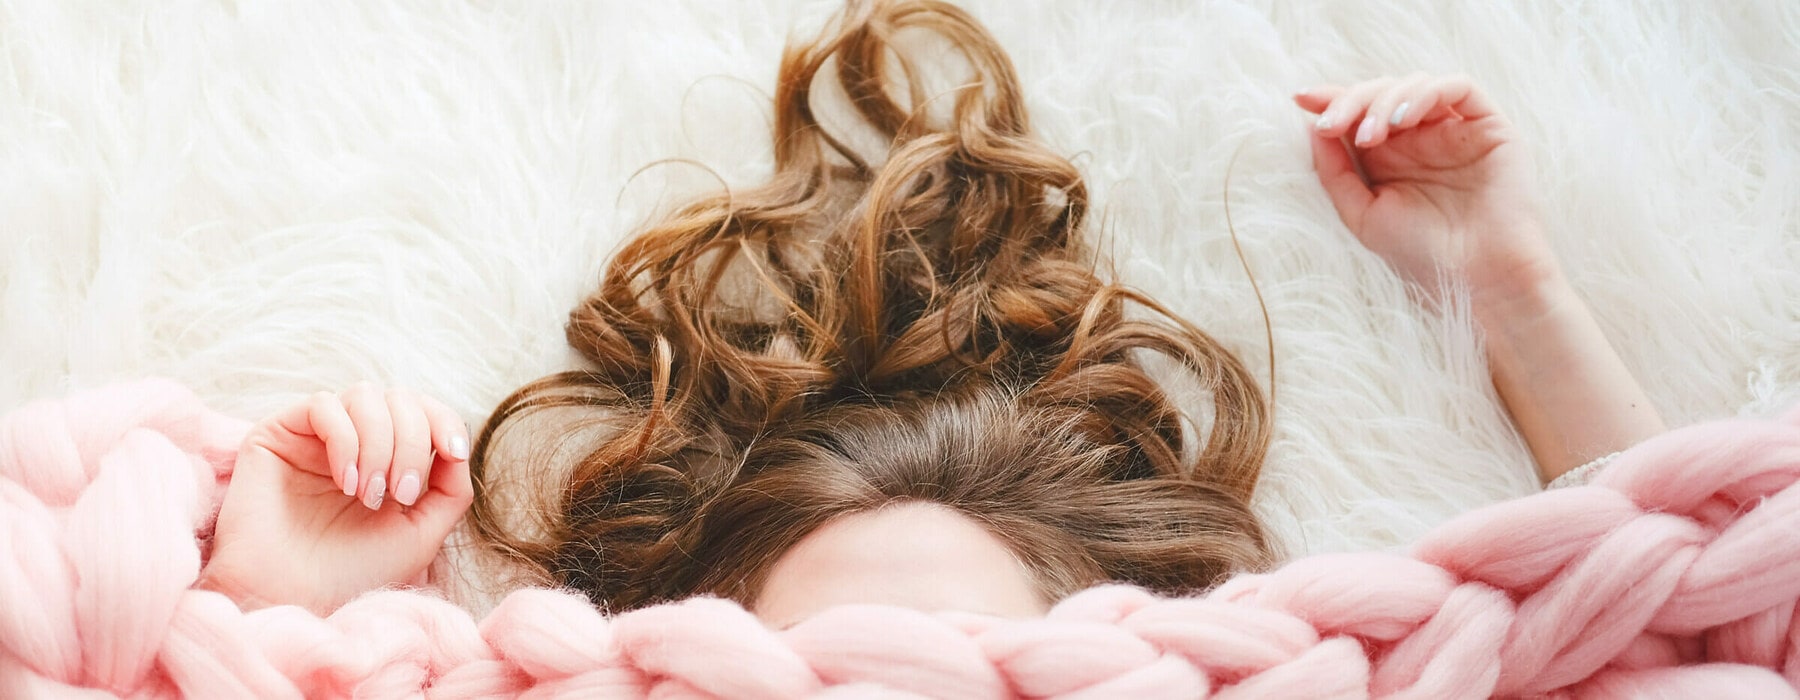 Young,Woman,With,Long,Brown,Hair,Sleeping,Under,Warm,Knitted